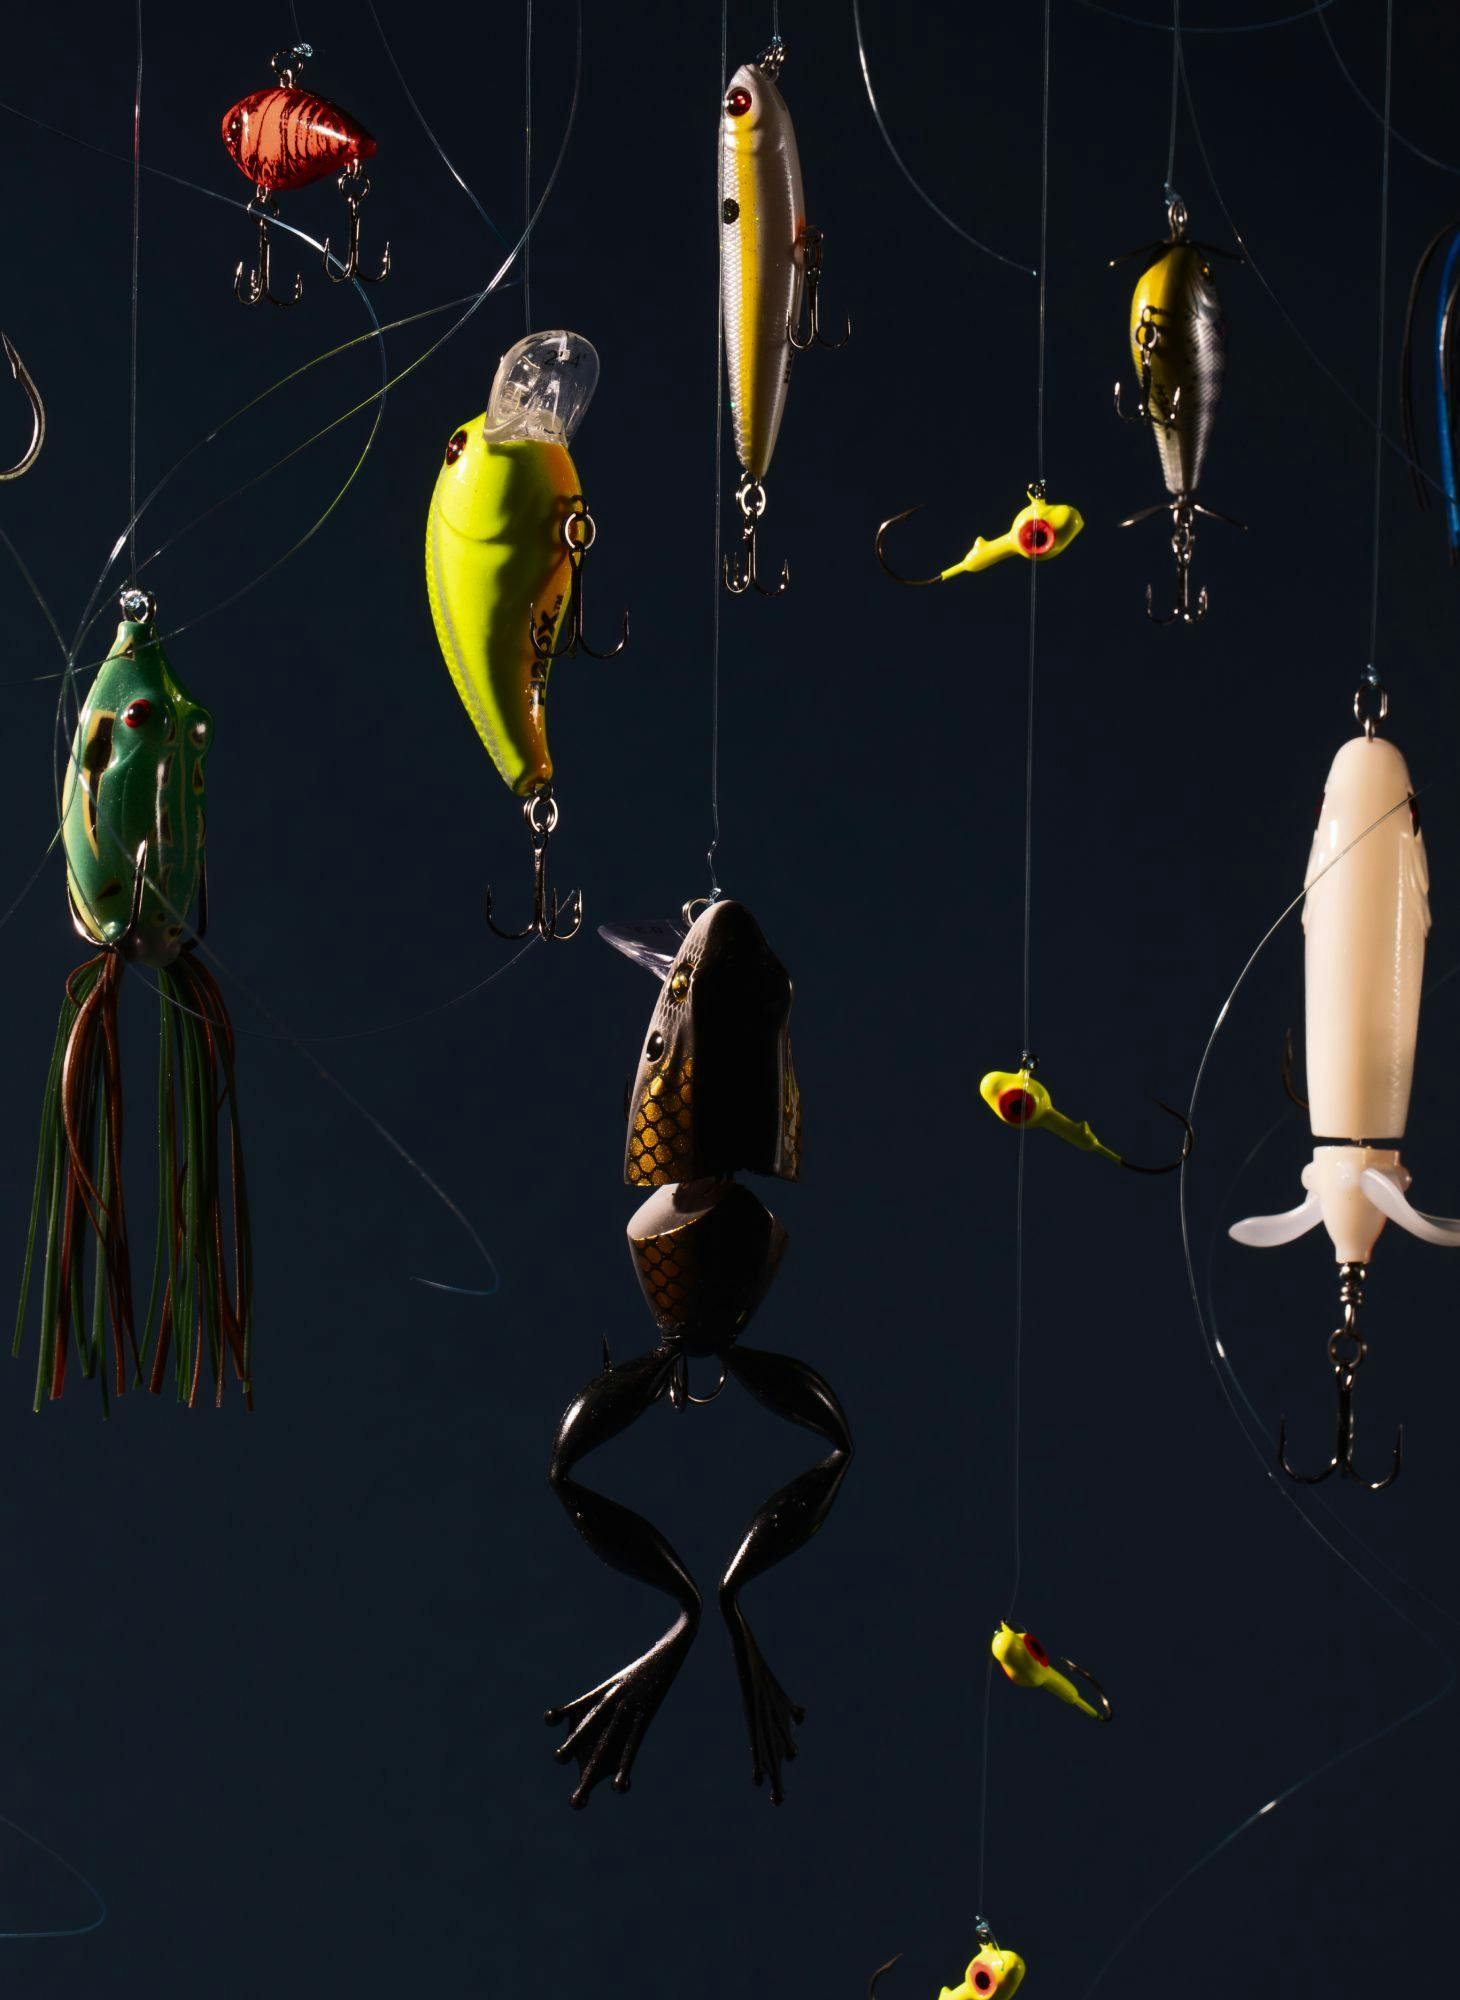 An assortment of brightly colored fishing lures